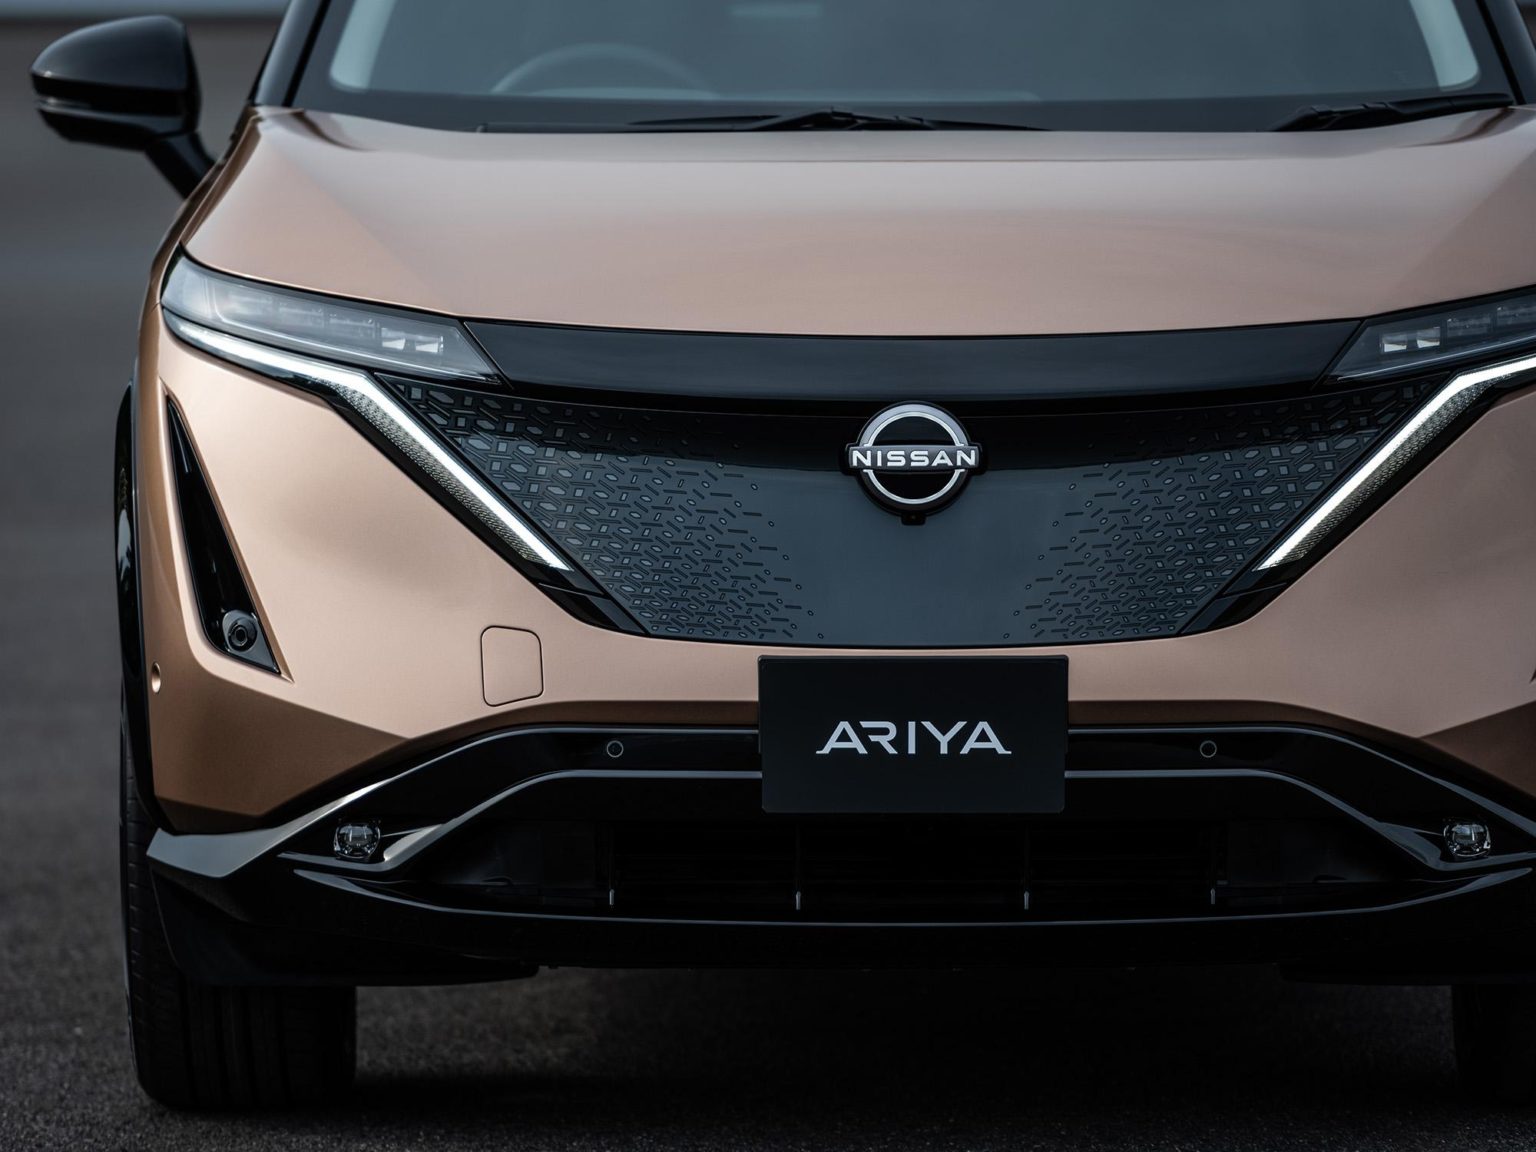 The Nissan Ariya is the company's first all-electric SUV.